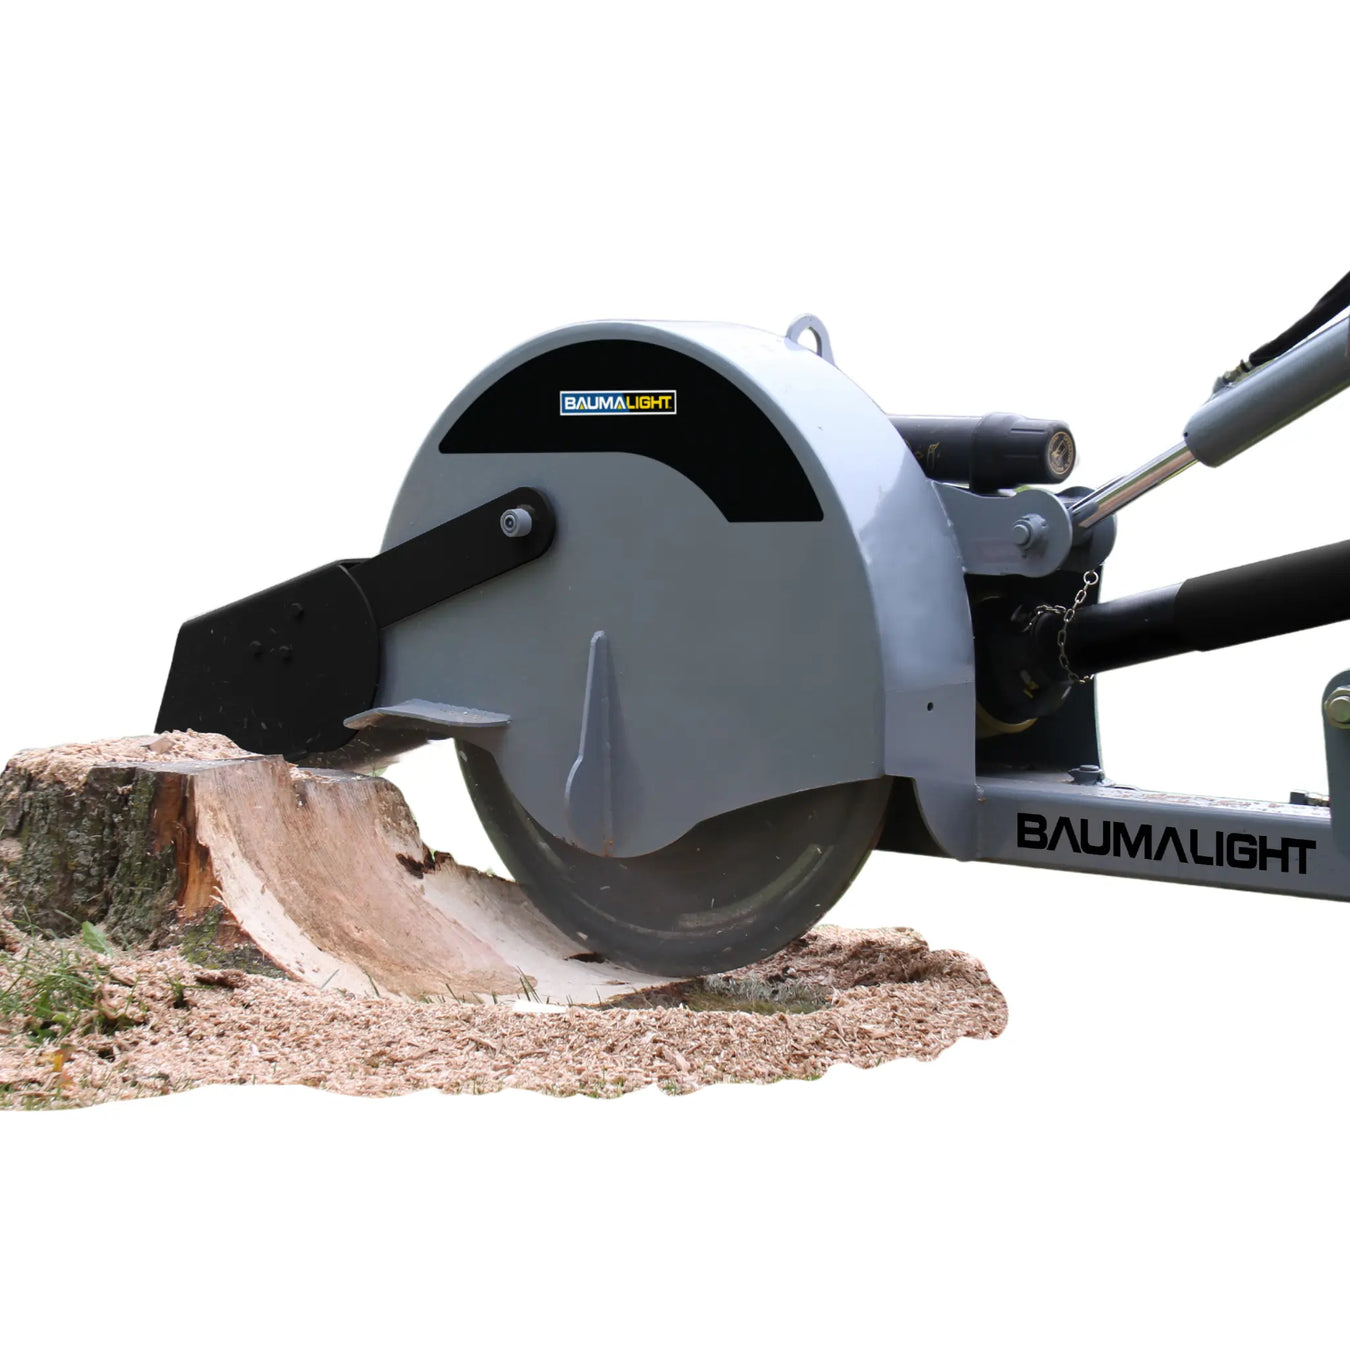 Tractor Stump Grinder Grinding A Tree Stump